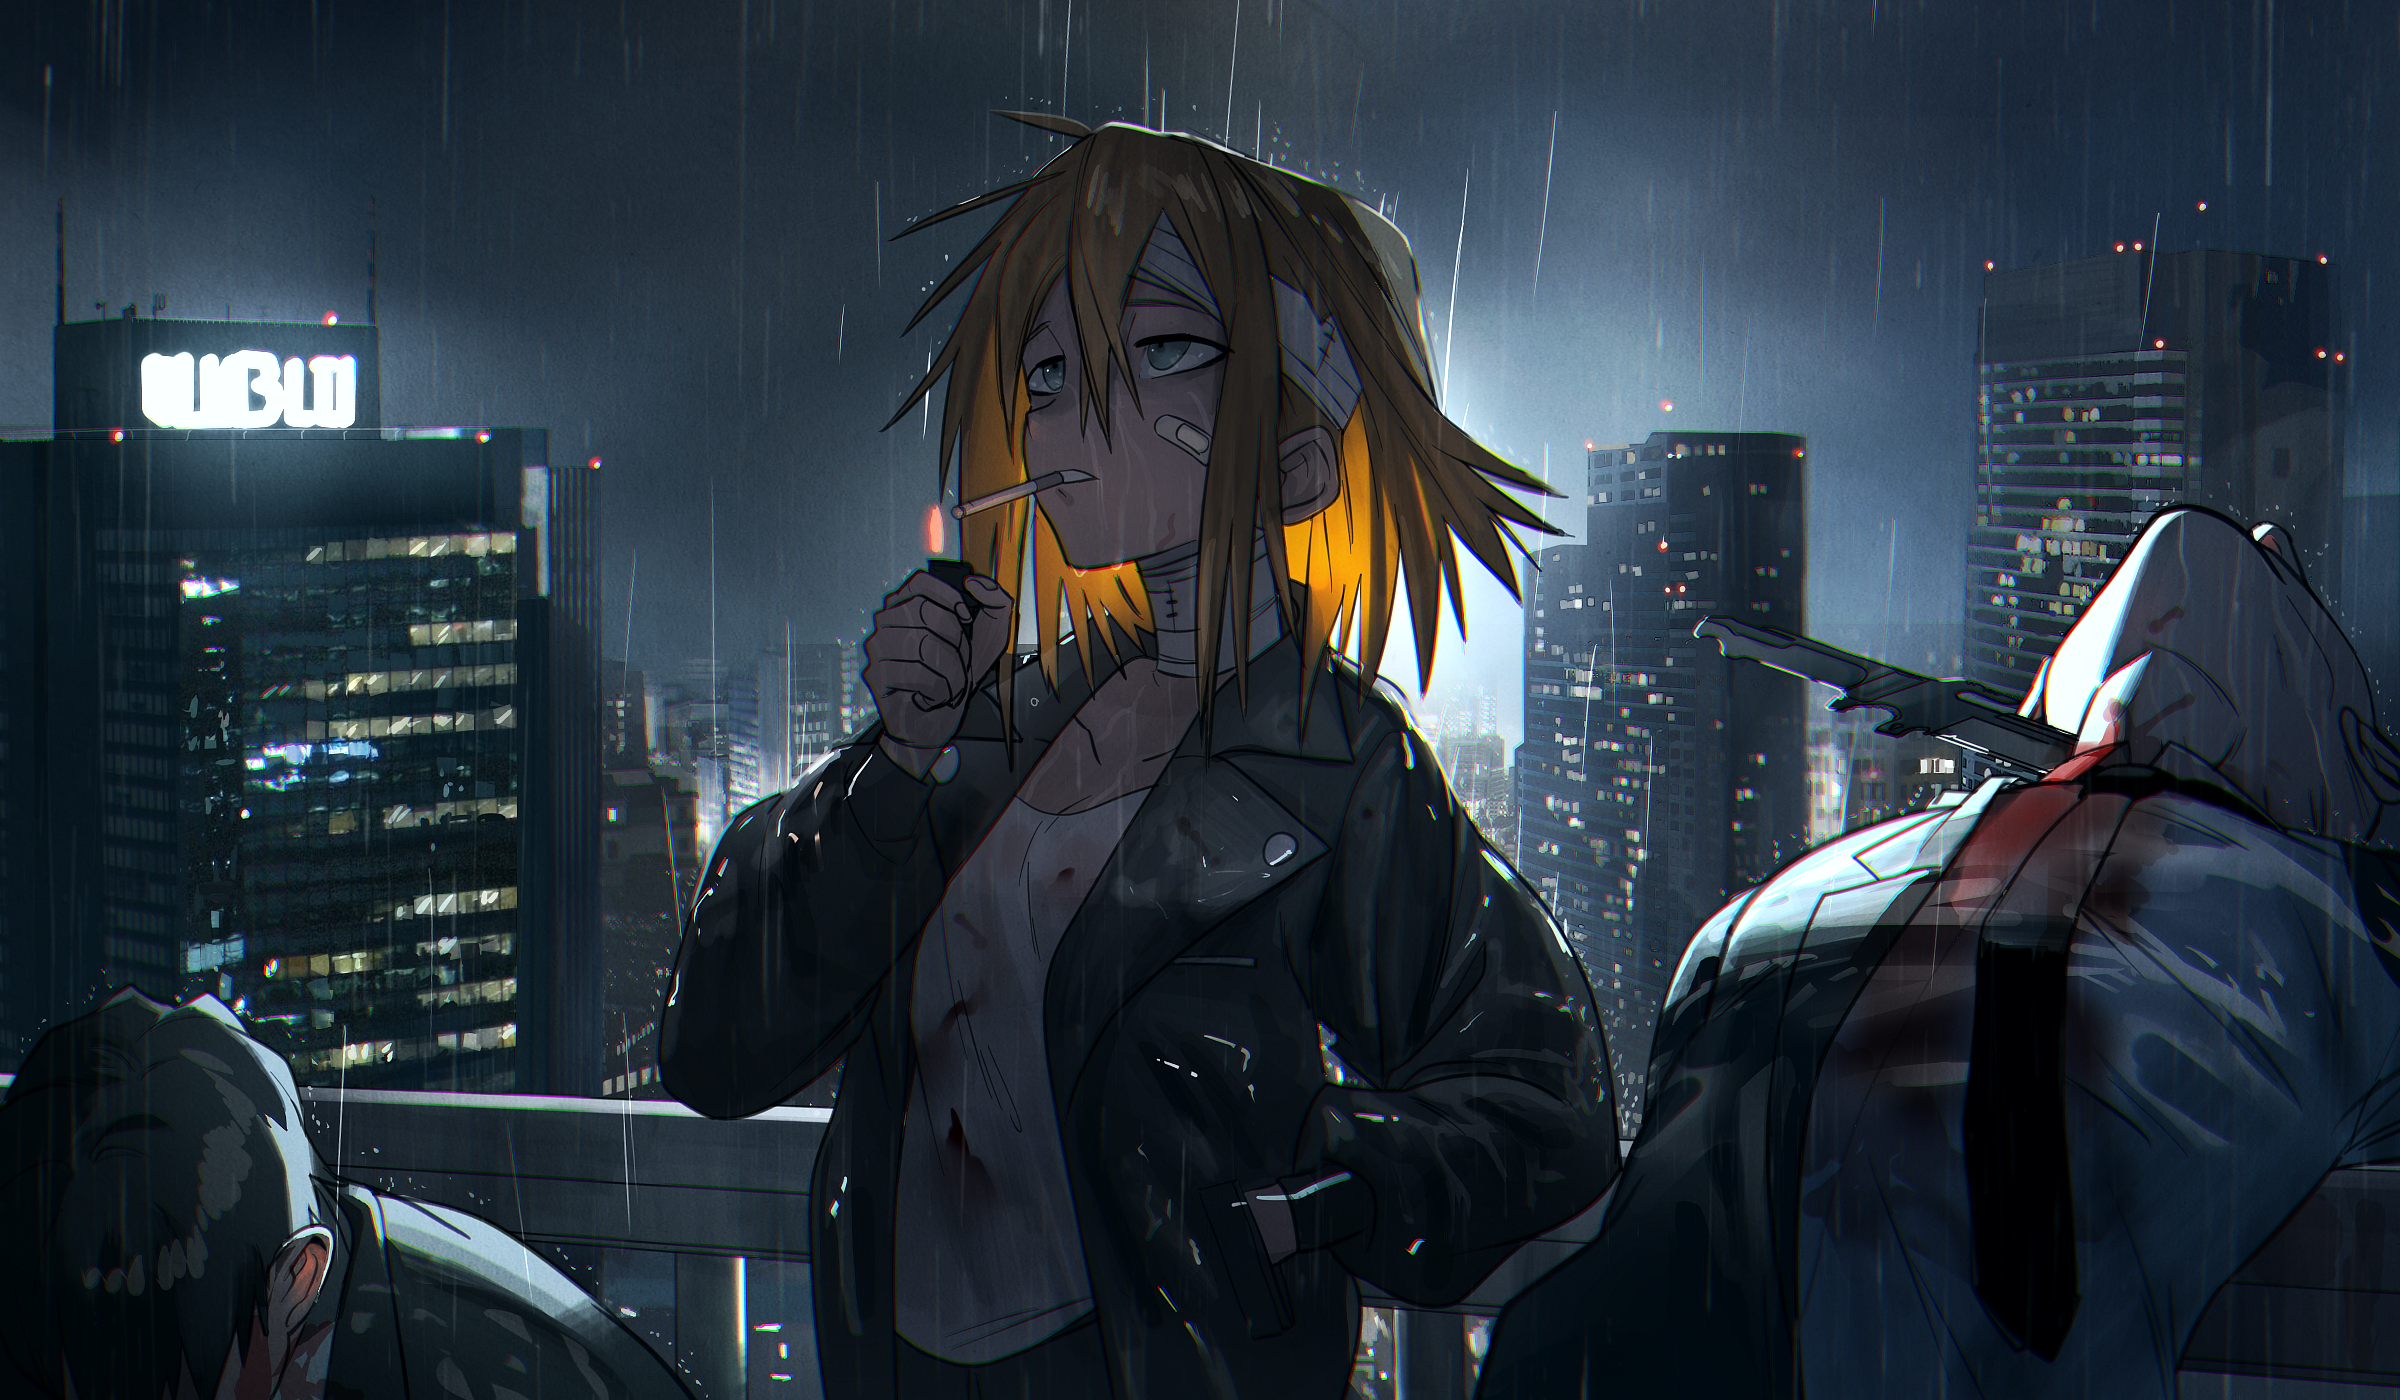 Anime 2400x1400 Munakata original characters rain cigarettes lighter blonde anime anime girls blue eyes bandages looking up band-aid cityscape rooftops white shirt jacket blood spatter blood stains knife railing